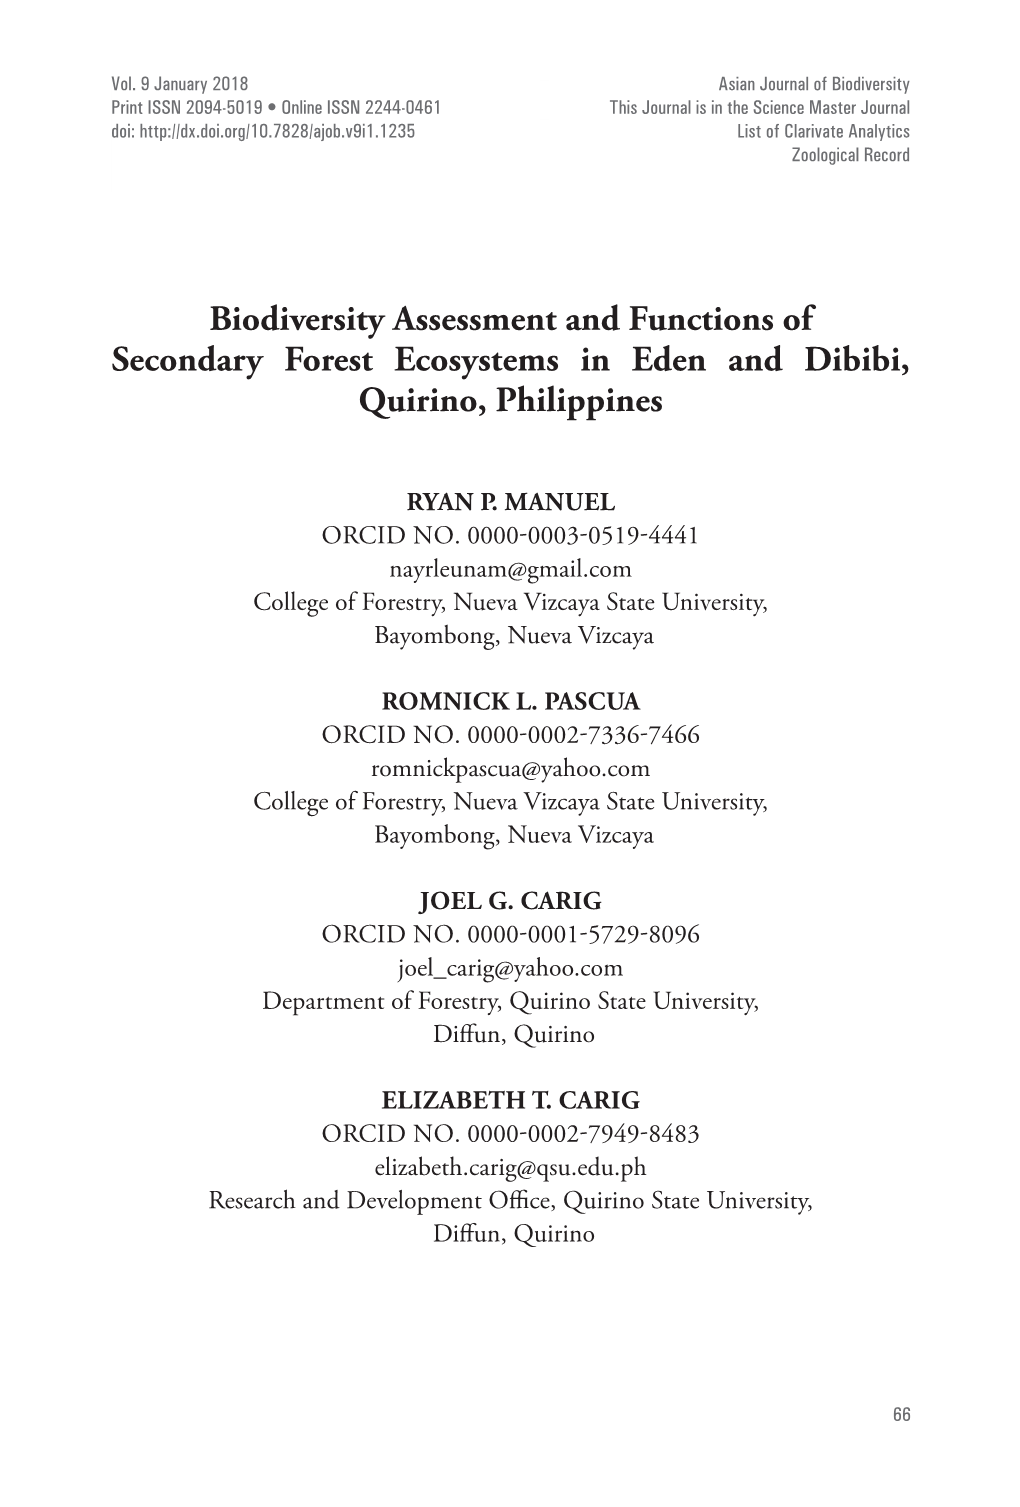 Biodiversity Assessment and Functions of Secondary Forest Ecosystems in Eden and Dibibi, Quirino, Philippines